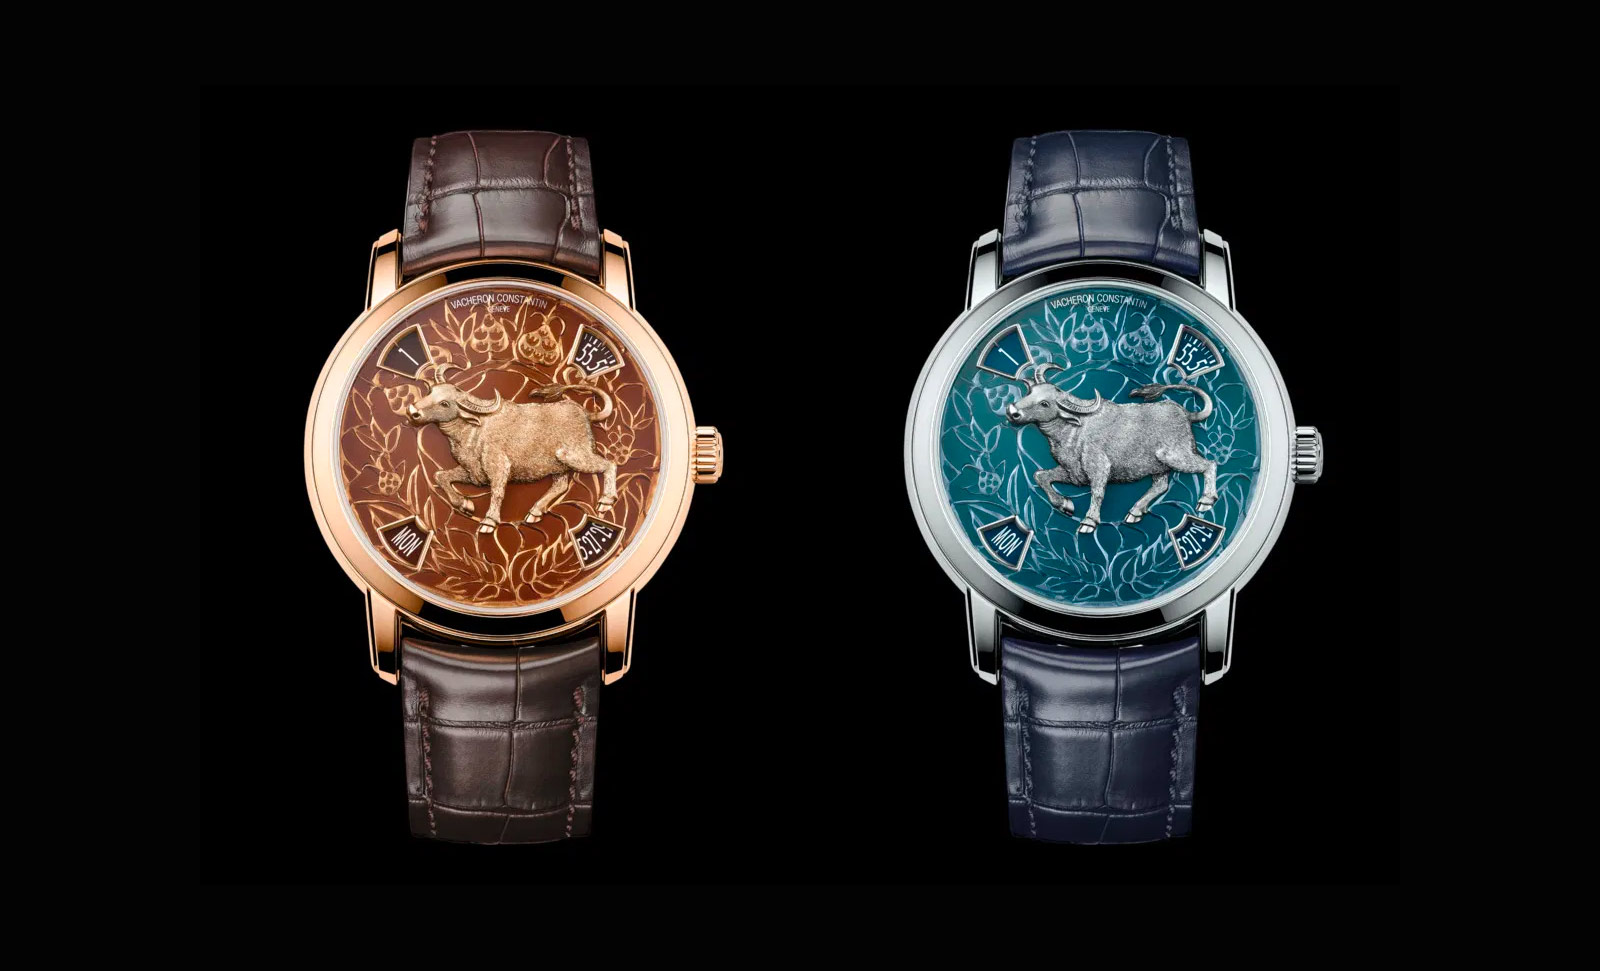 The Vacheron Constantin Métiers d'Art The Legend of the Chinese Zodiac – Year of the Ox timepiece is offered in two distinctive colour palettes